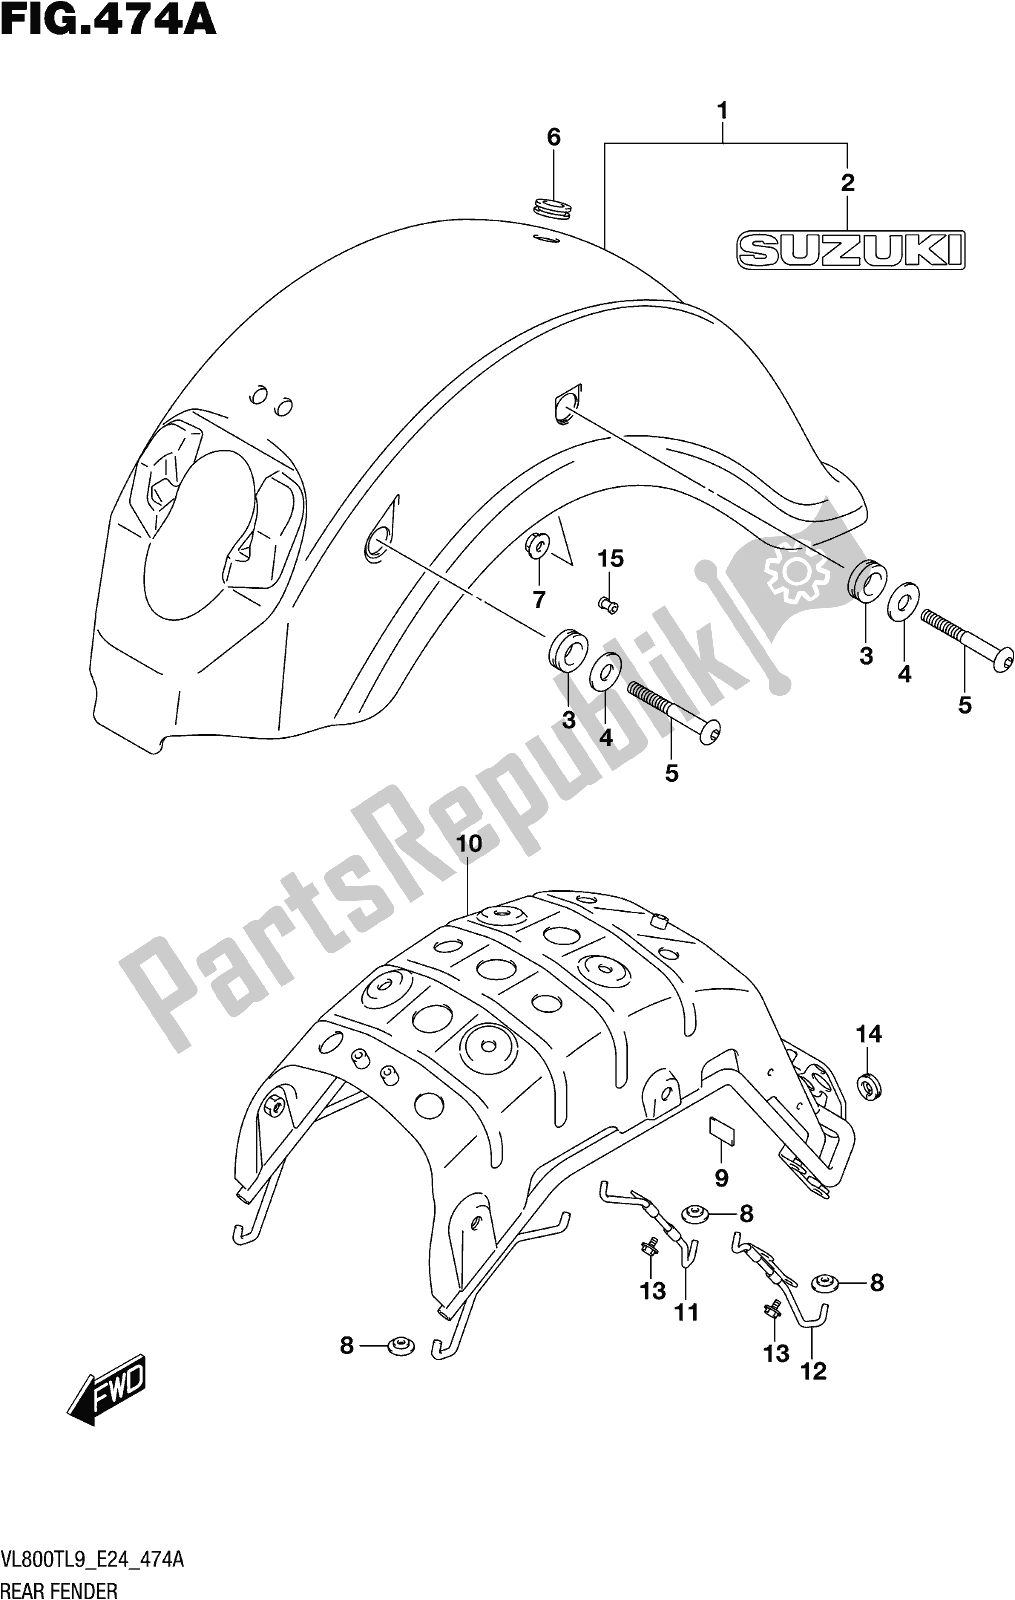 All parts for the Fig. 474a Rear Fender of the Suzuki VL 800T 2019